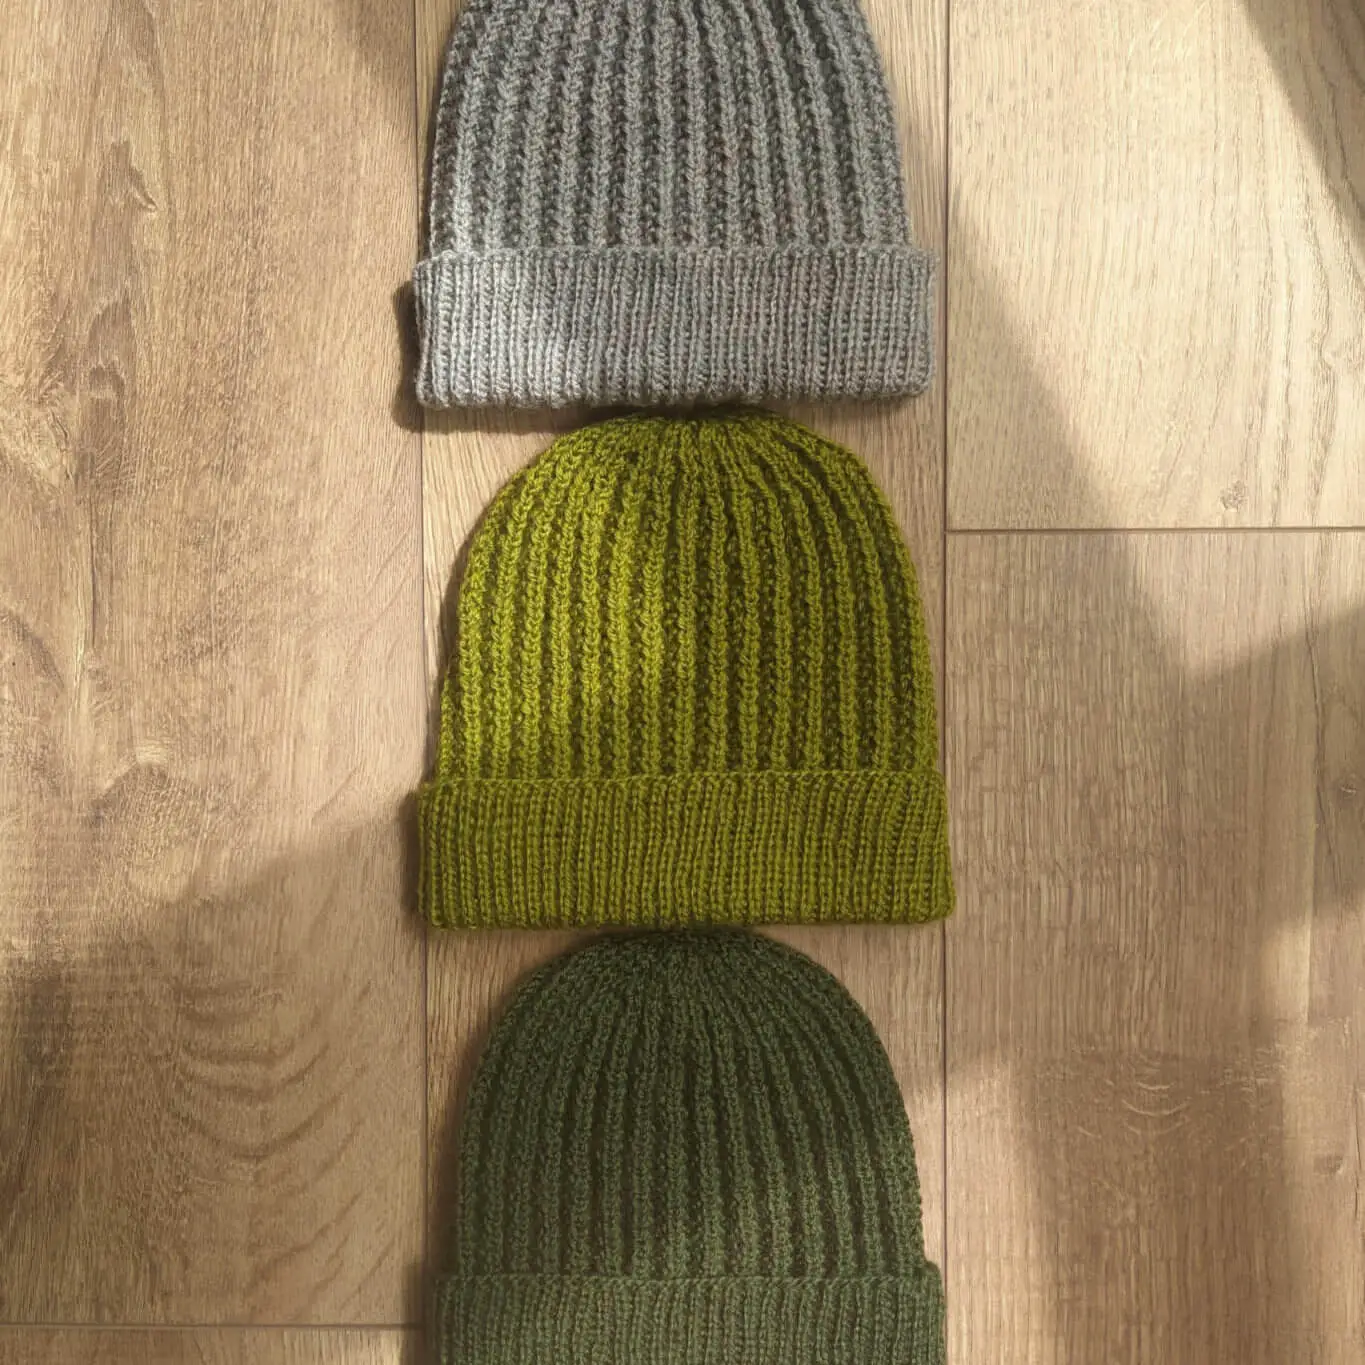 Three one more mistake beanies stacked, with shadows stretching across